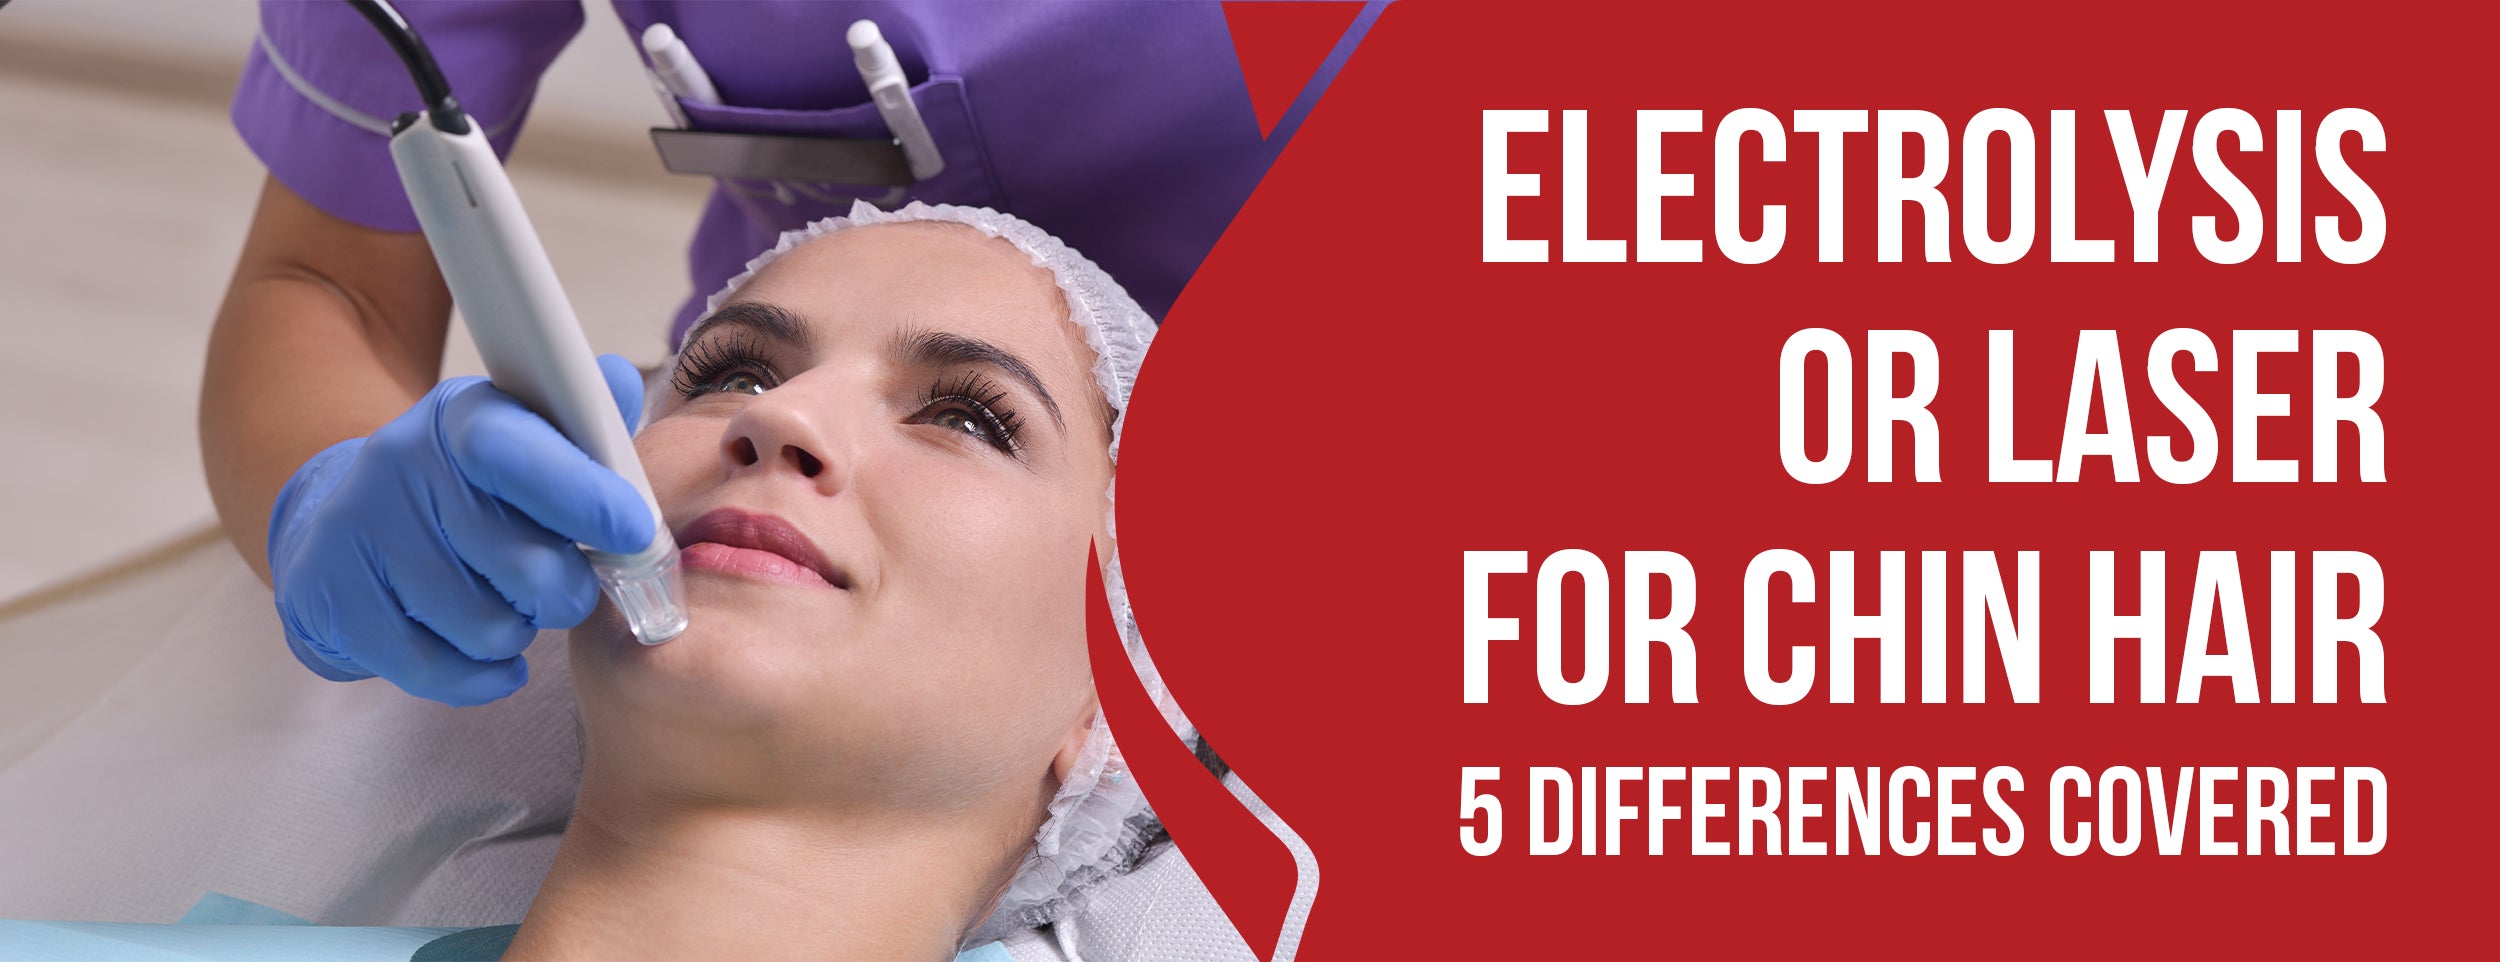 Facts About Electrolysis vs Laser for Chin Hair